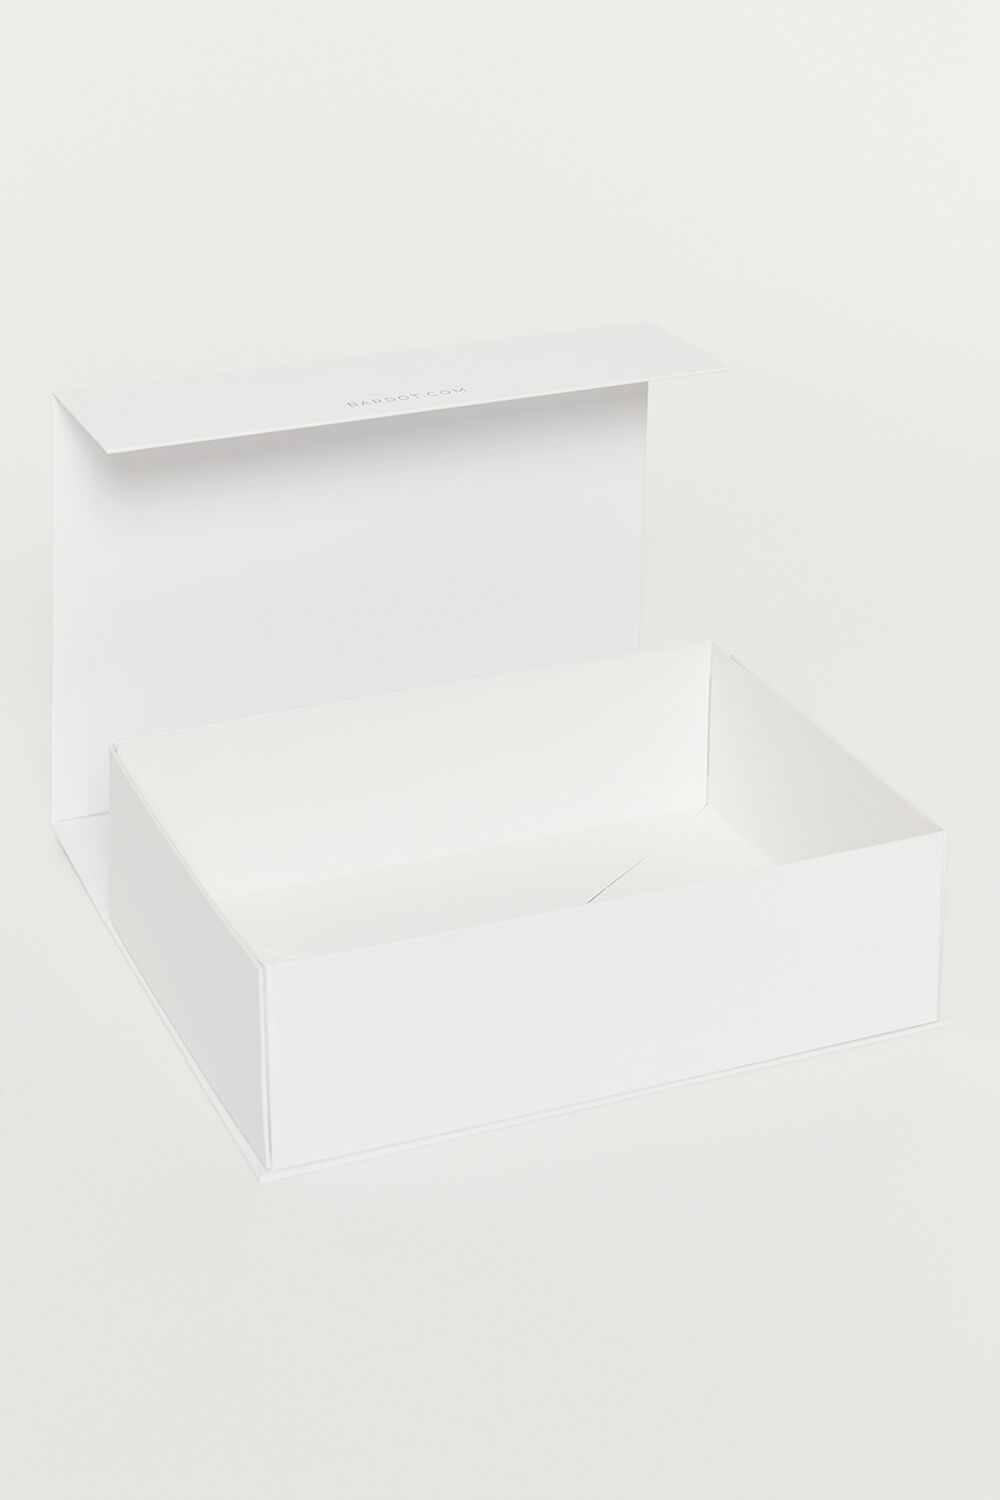 LARGE GIFT BOX in colour BRIGHT WHITE